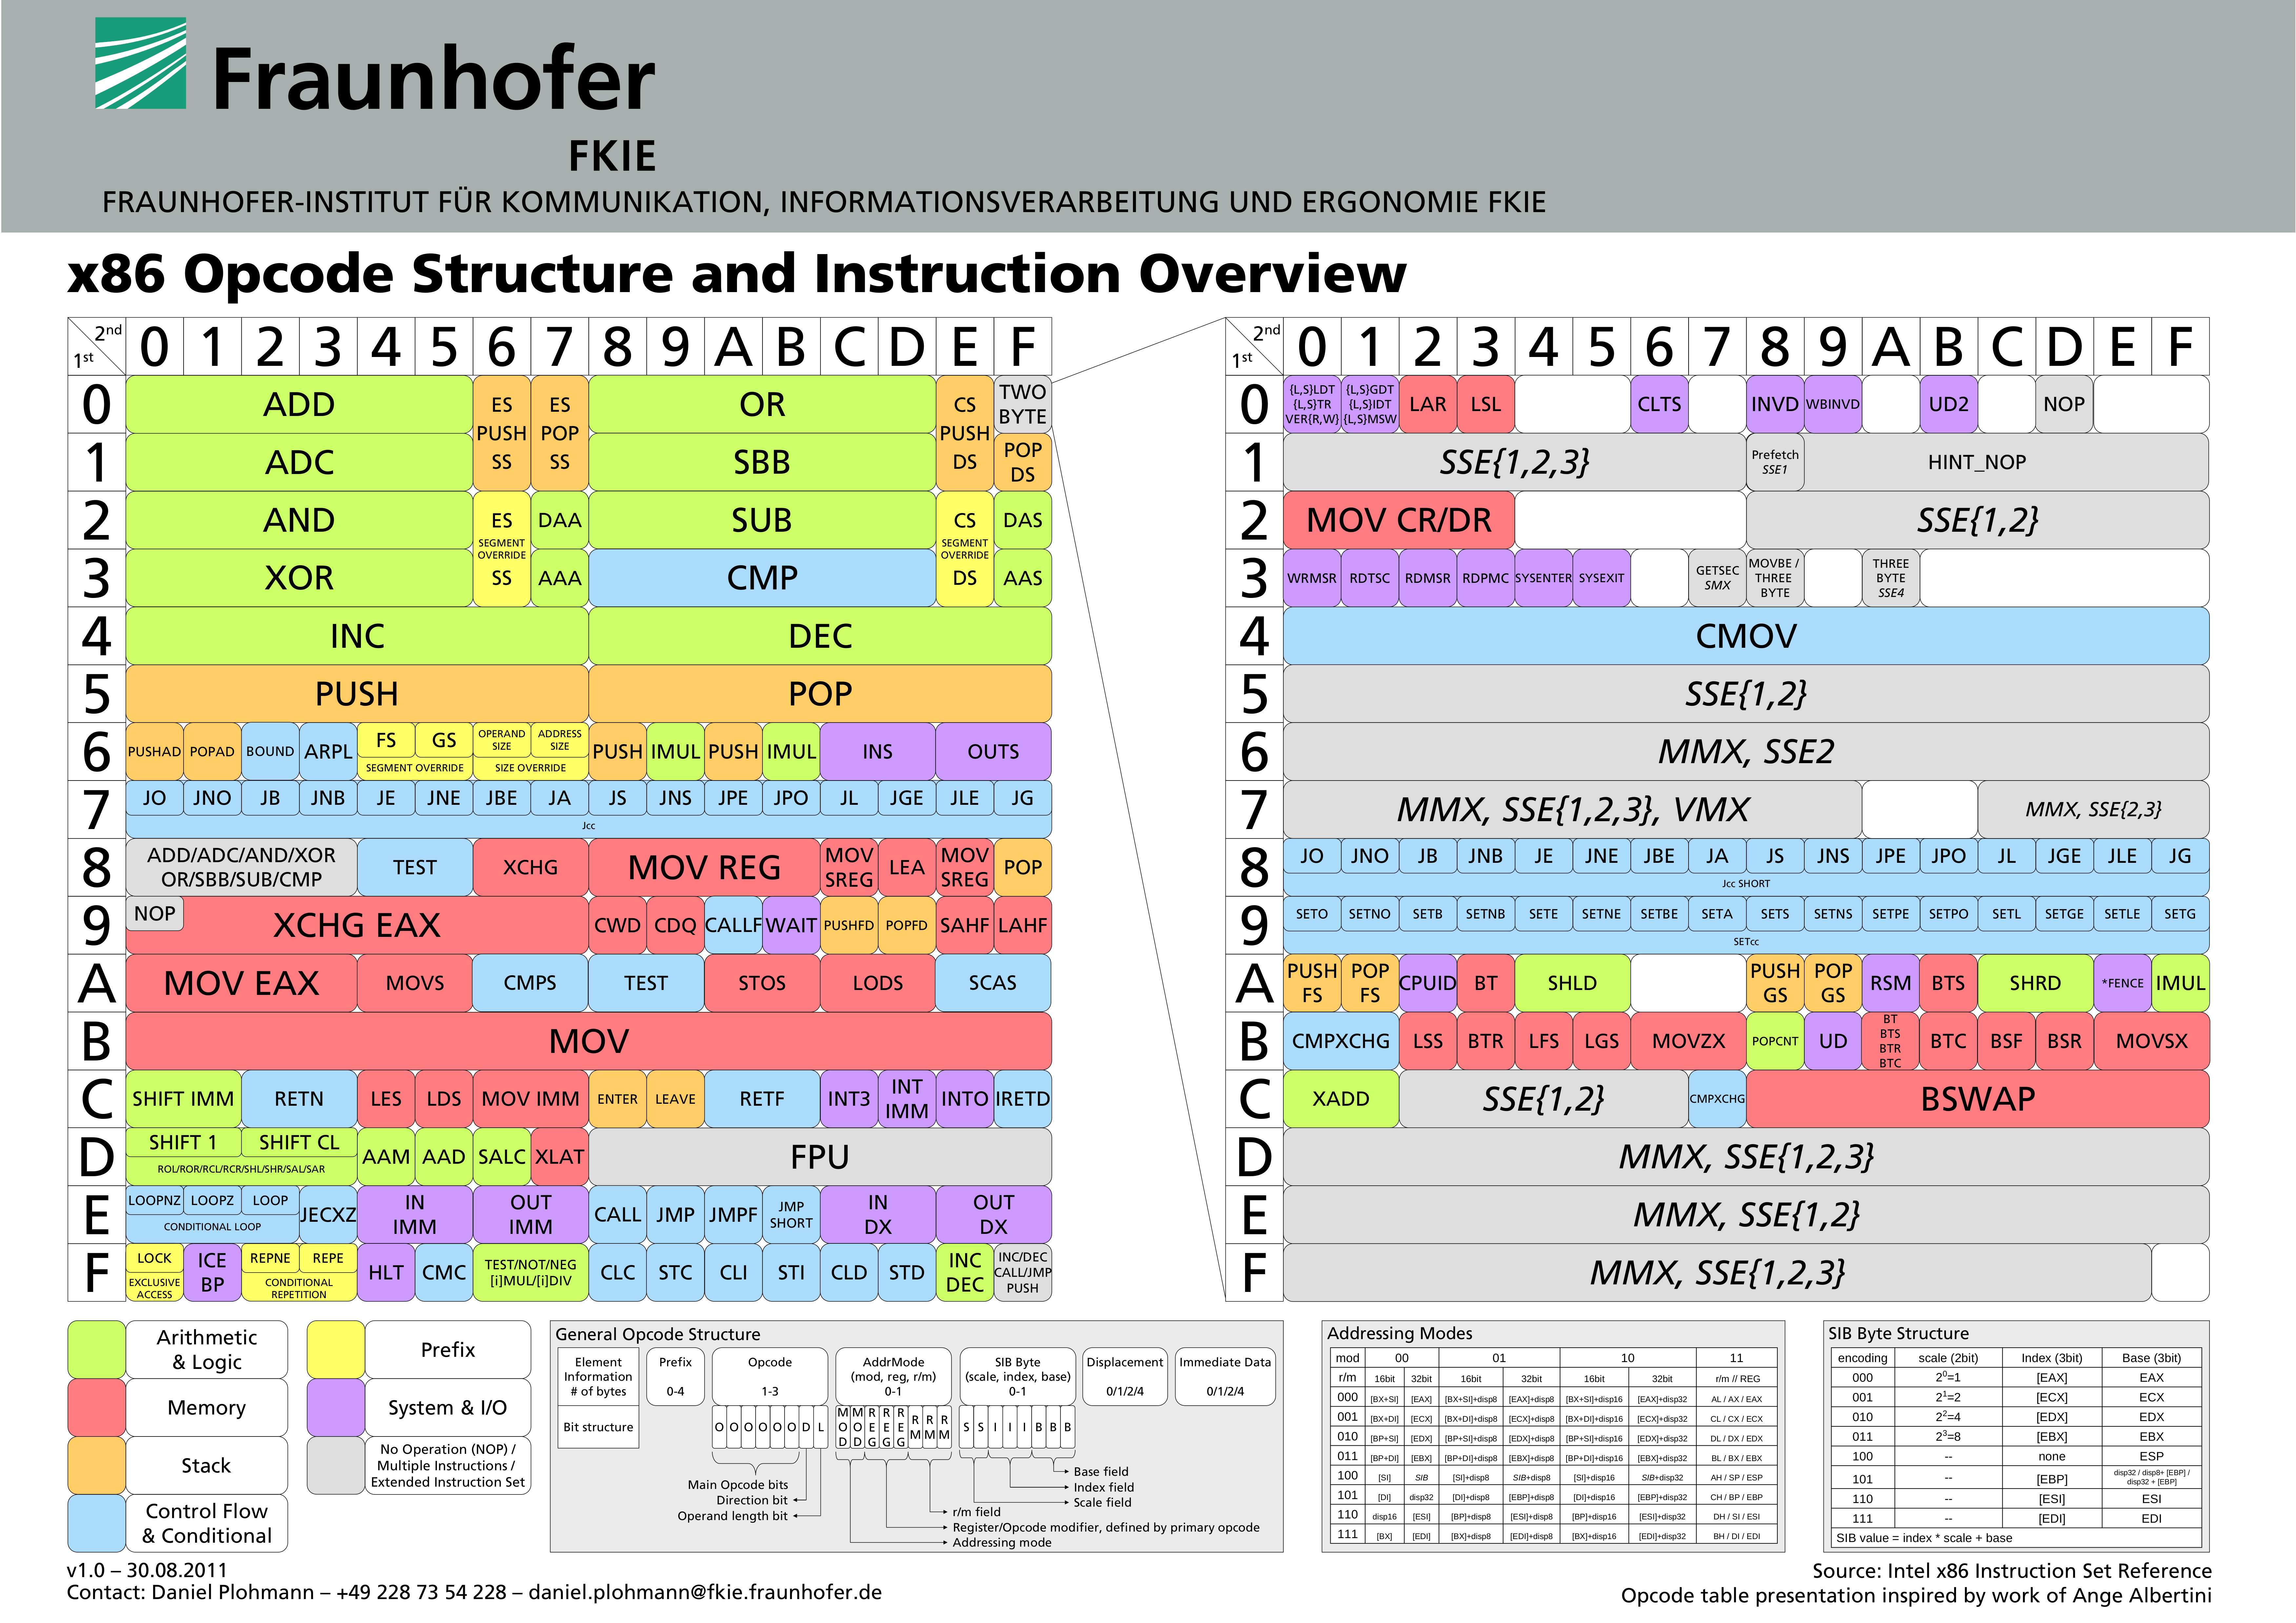 x86_opcode_structure_and_instruction_overview.png